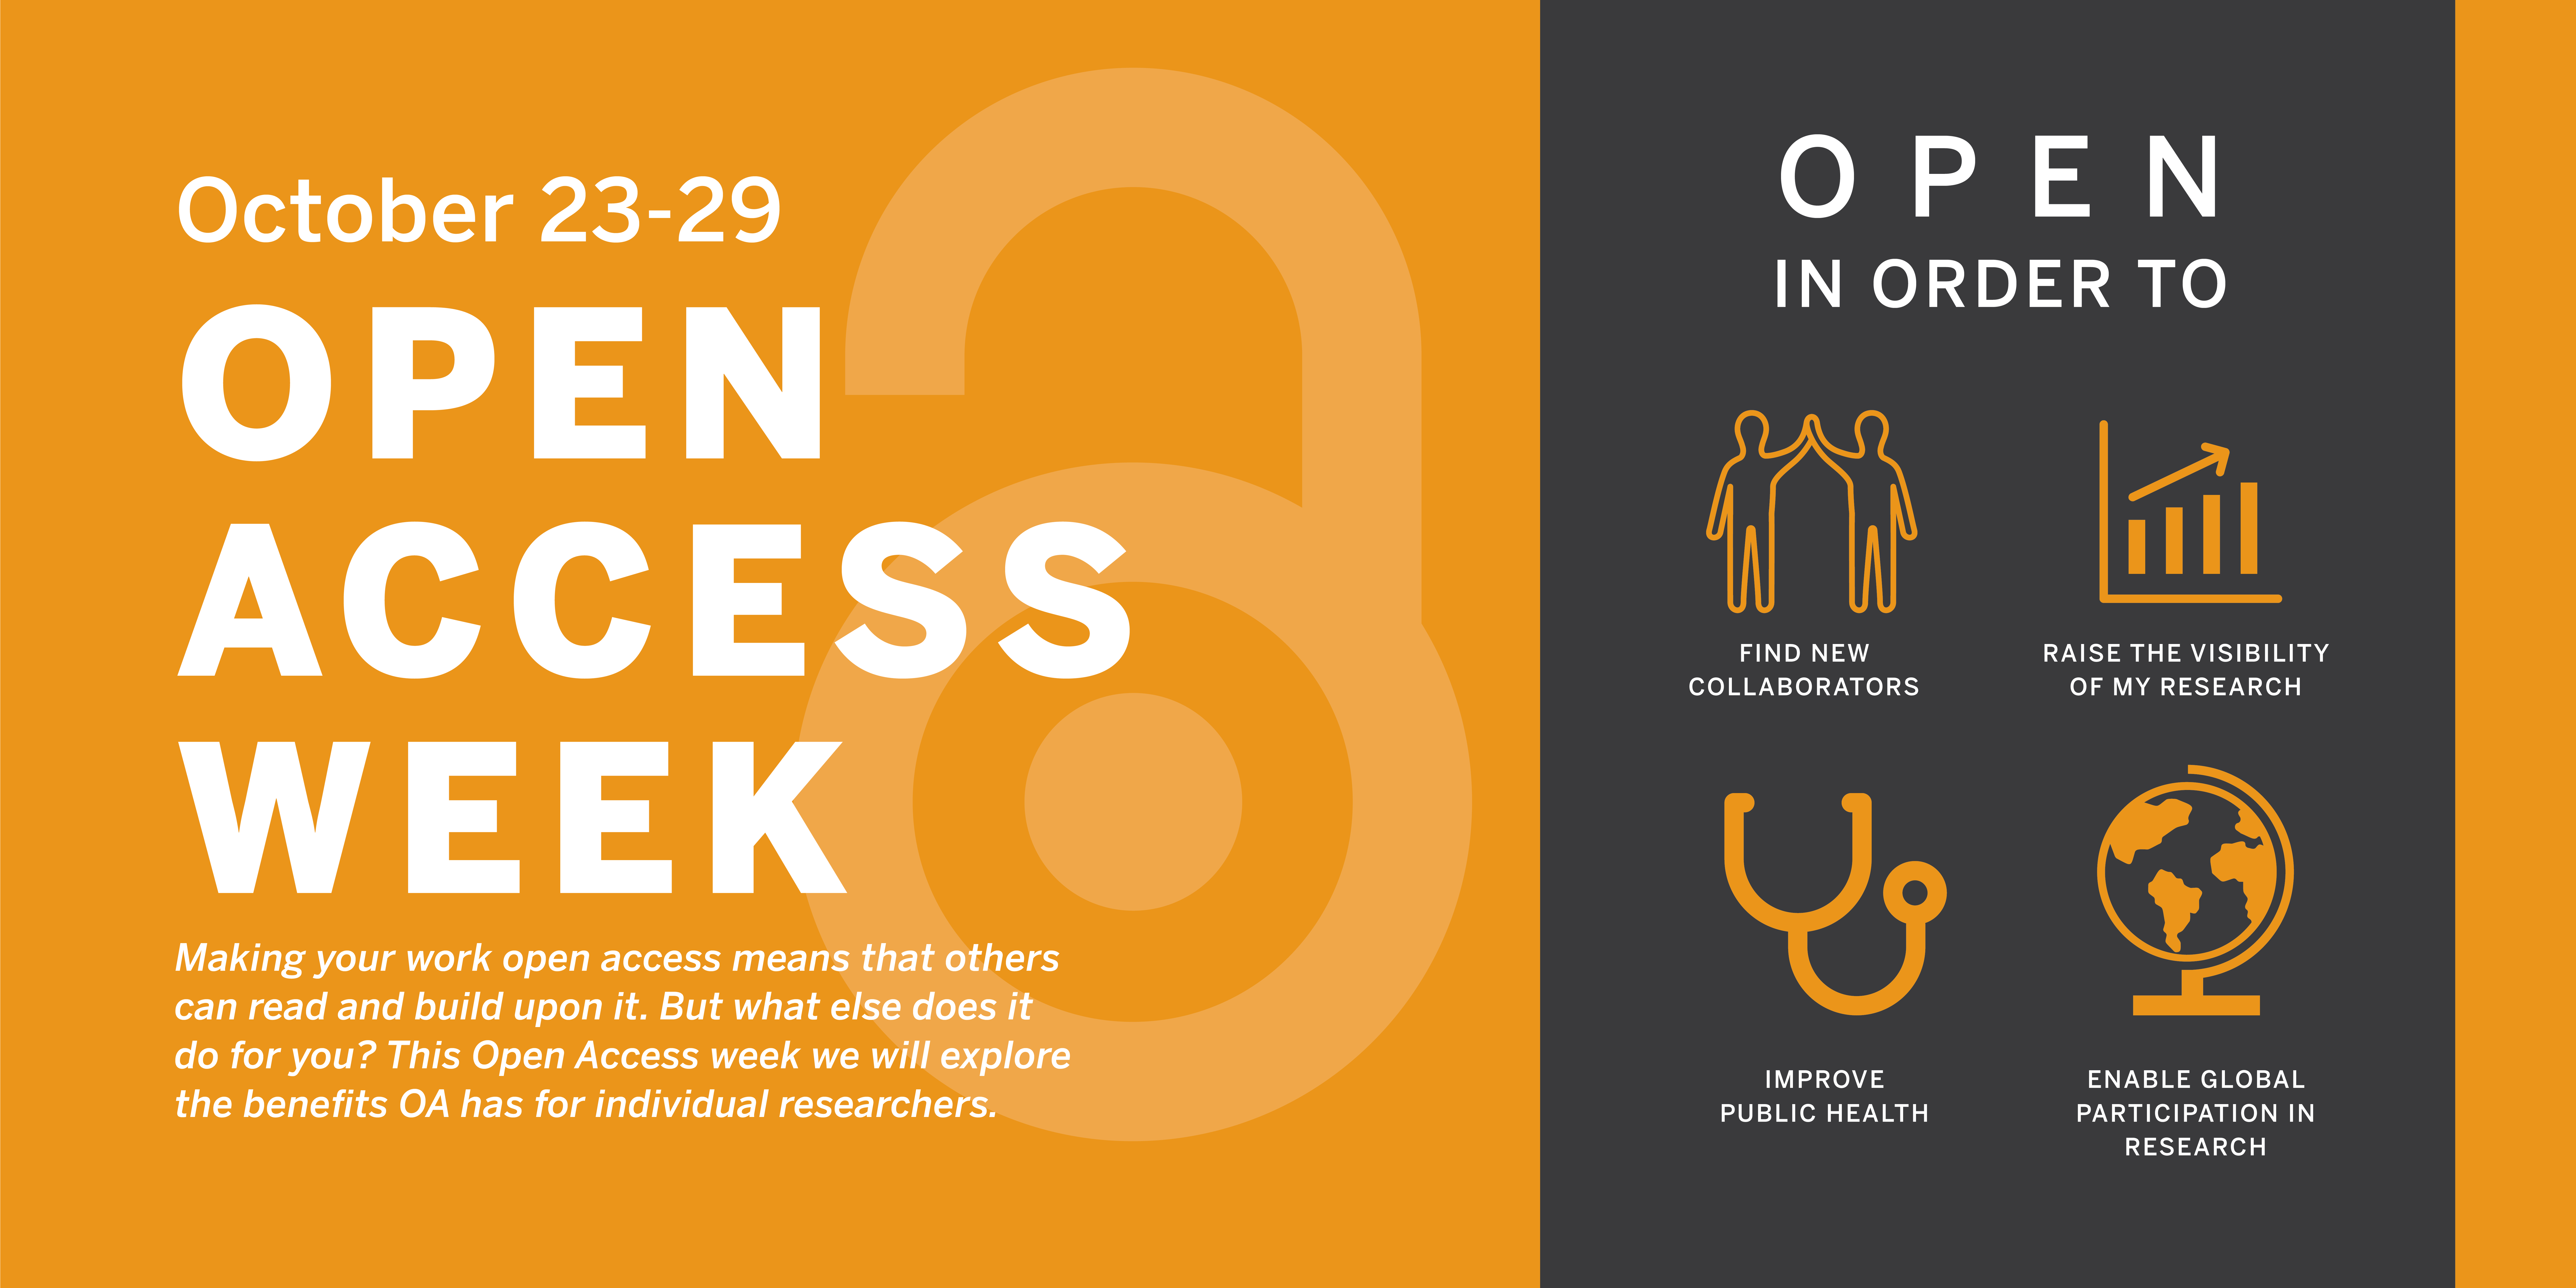 Images 2 & 3: Open Access Week Promotional Materials